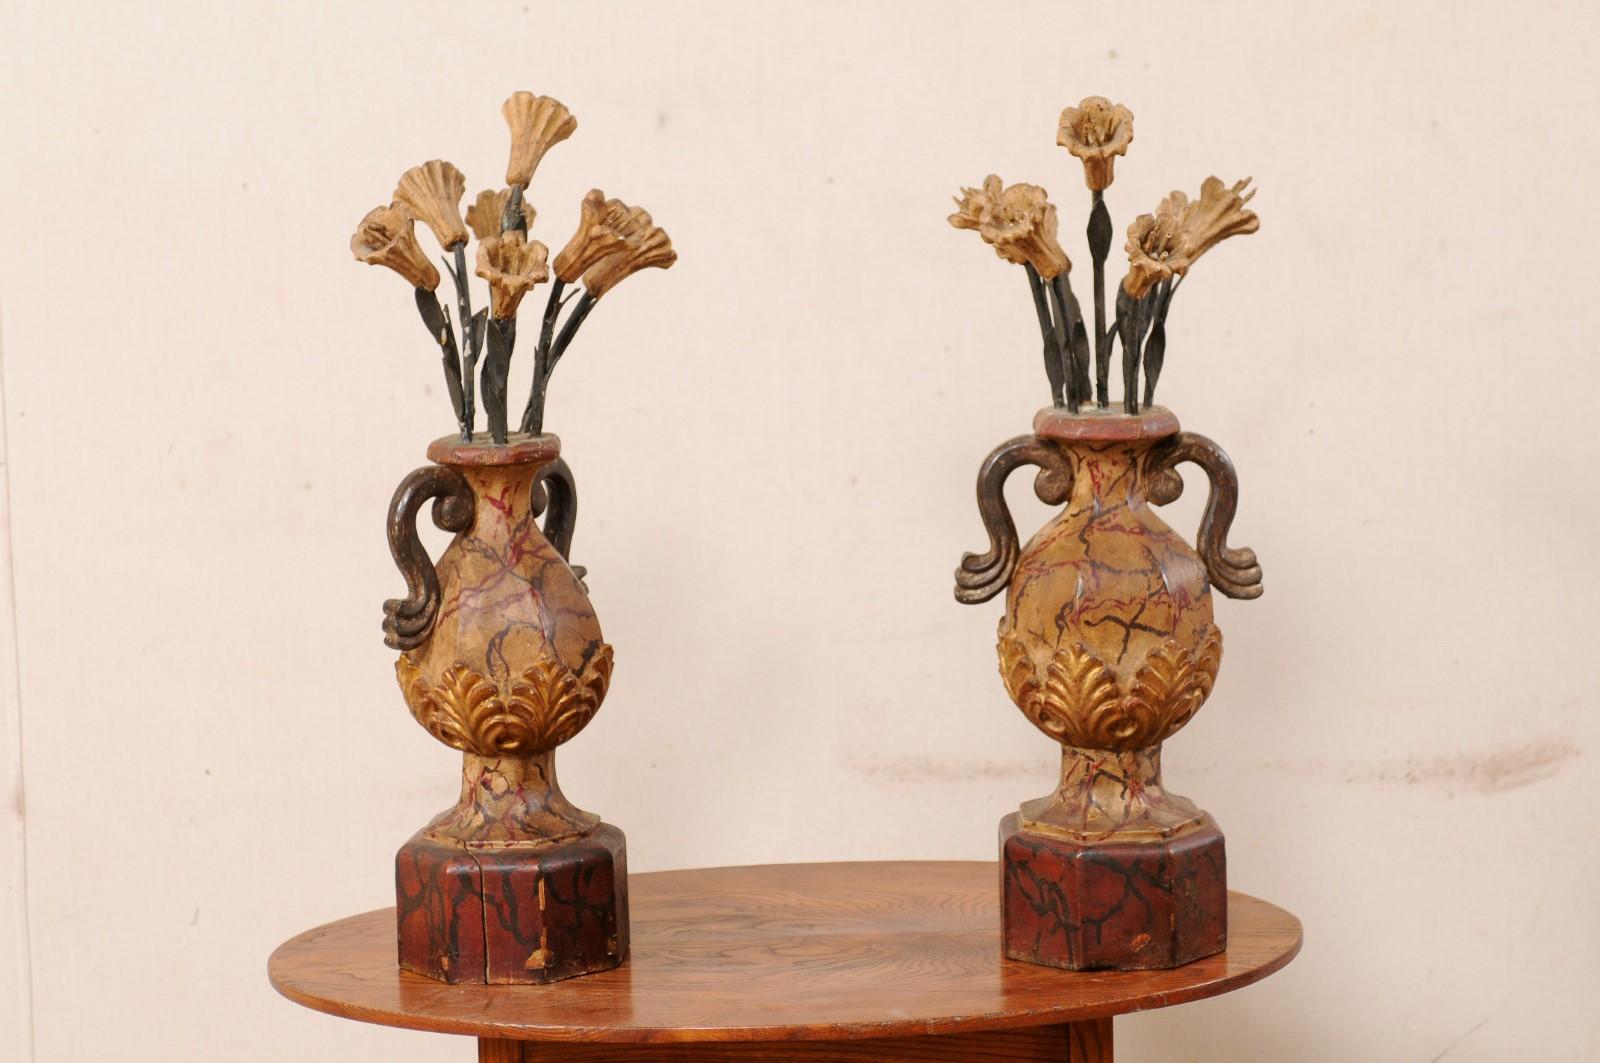 An Italian pair of carved wood urns from the early 20th century. This antique pair of decorations from Italy each feature a hand-carved, two-handled urn, which is raised upon a pedestal base, with a floral bouquet springing upward out from it's top.